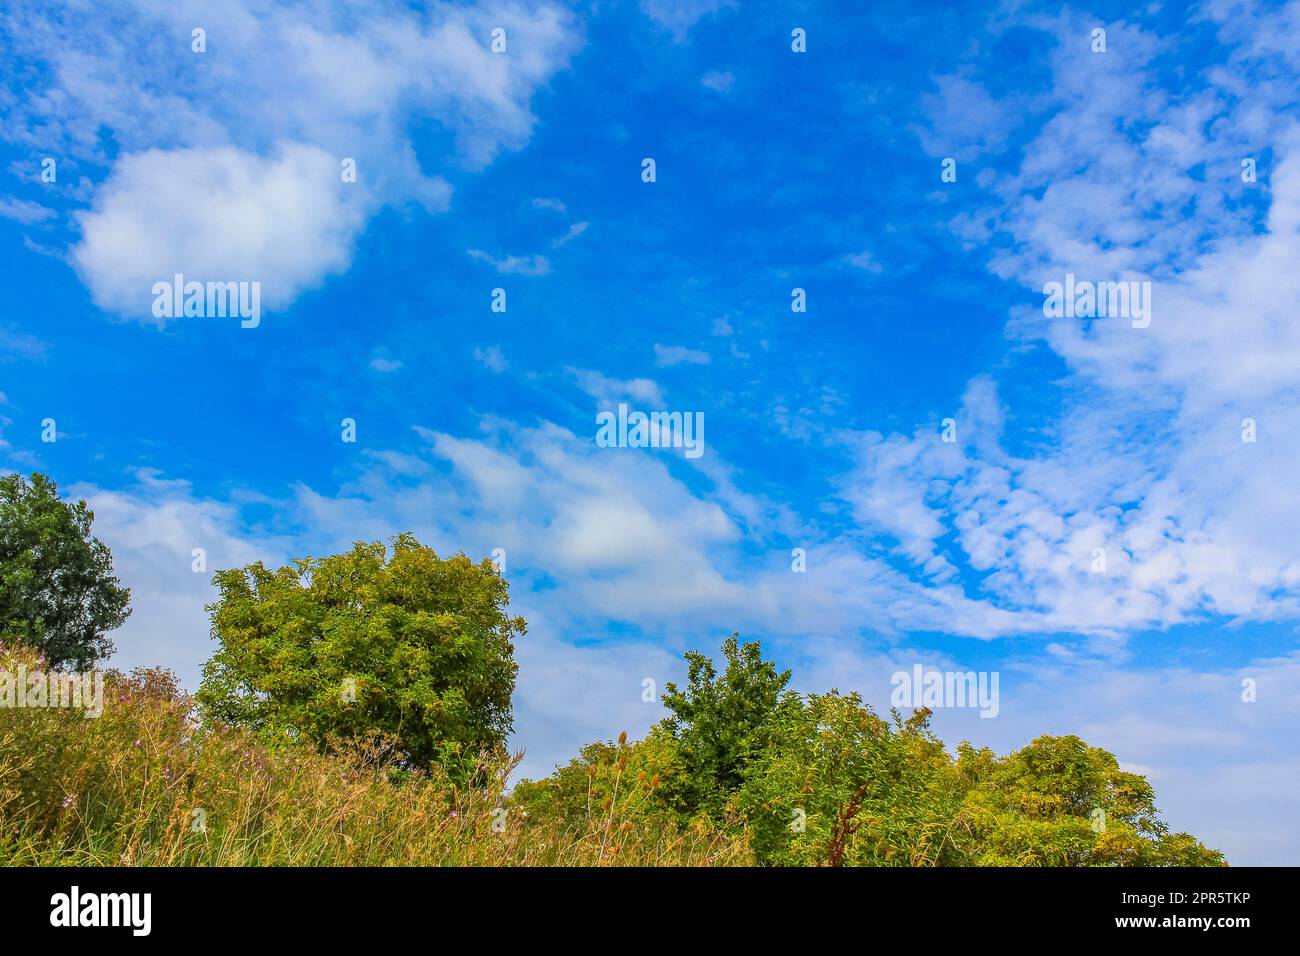 Blue sky with chemical clouds chemtrails on sunny day Germany. Stock Photo